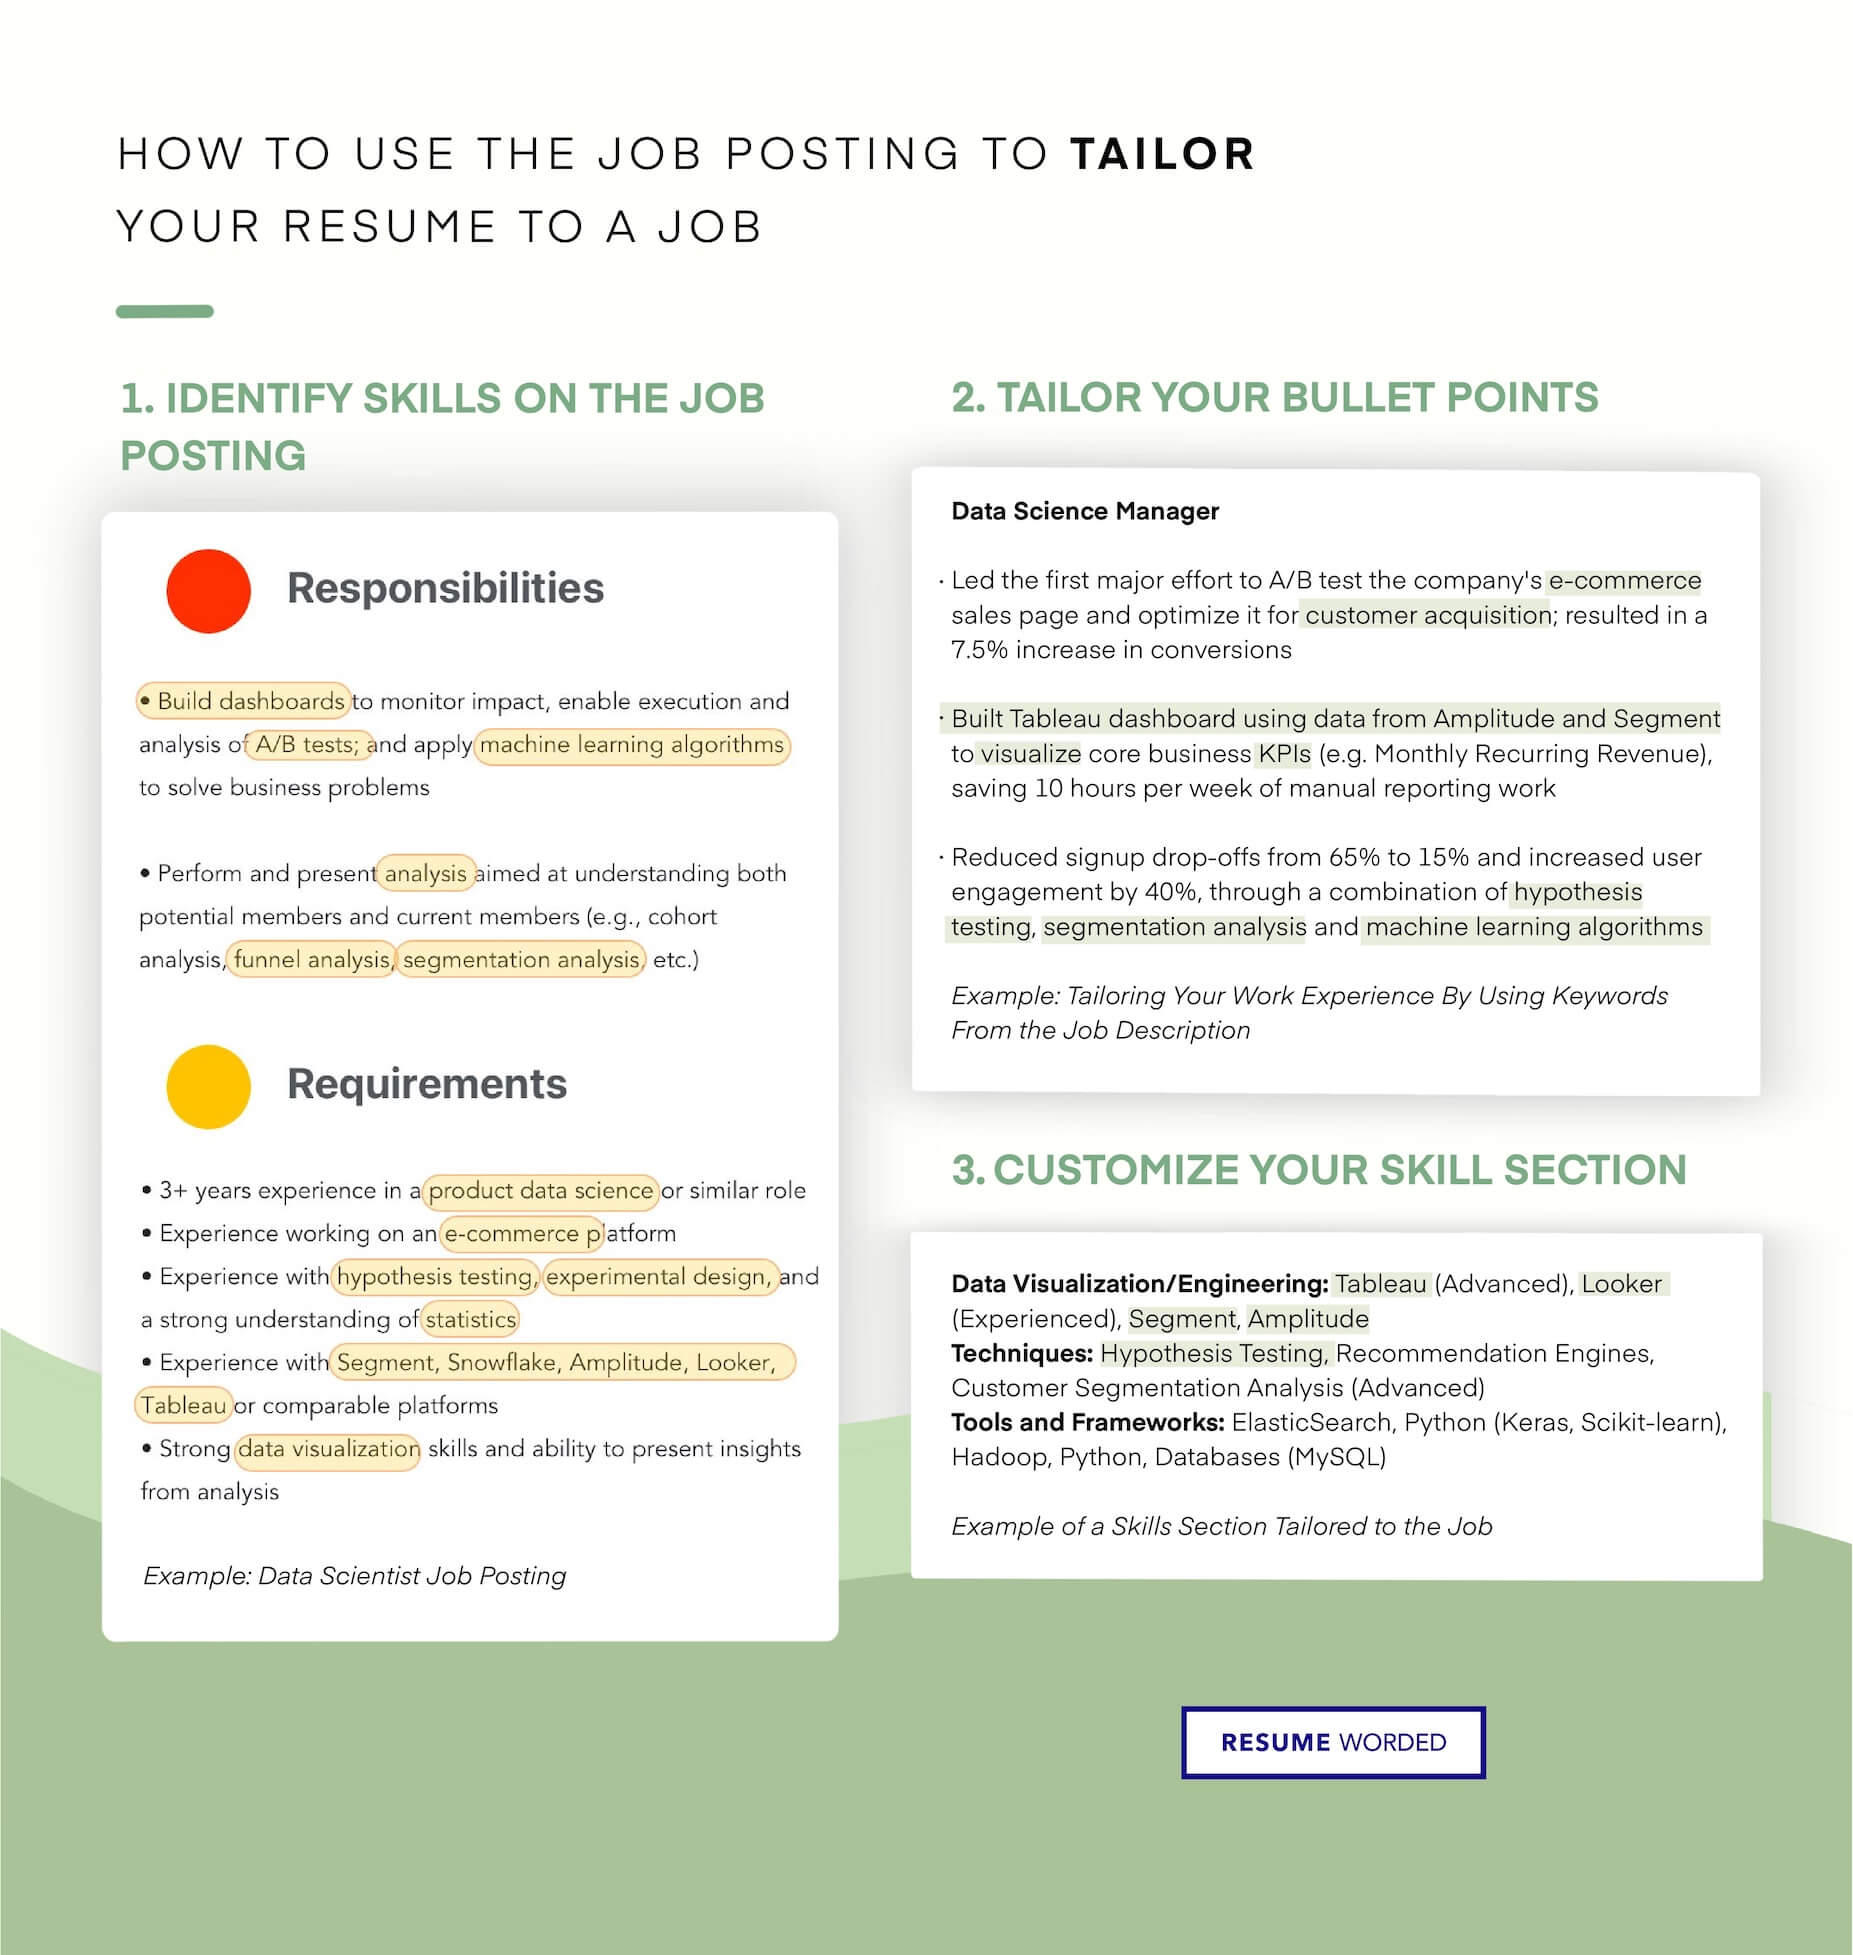 Tailor your resume to your digital marketing experience. - Digital Marketing Executive  Resume